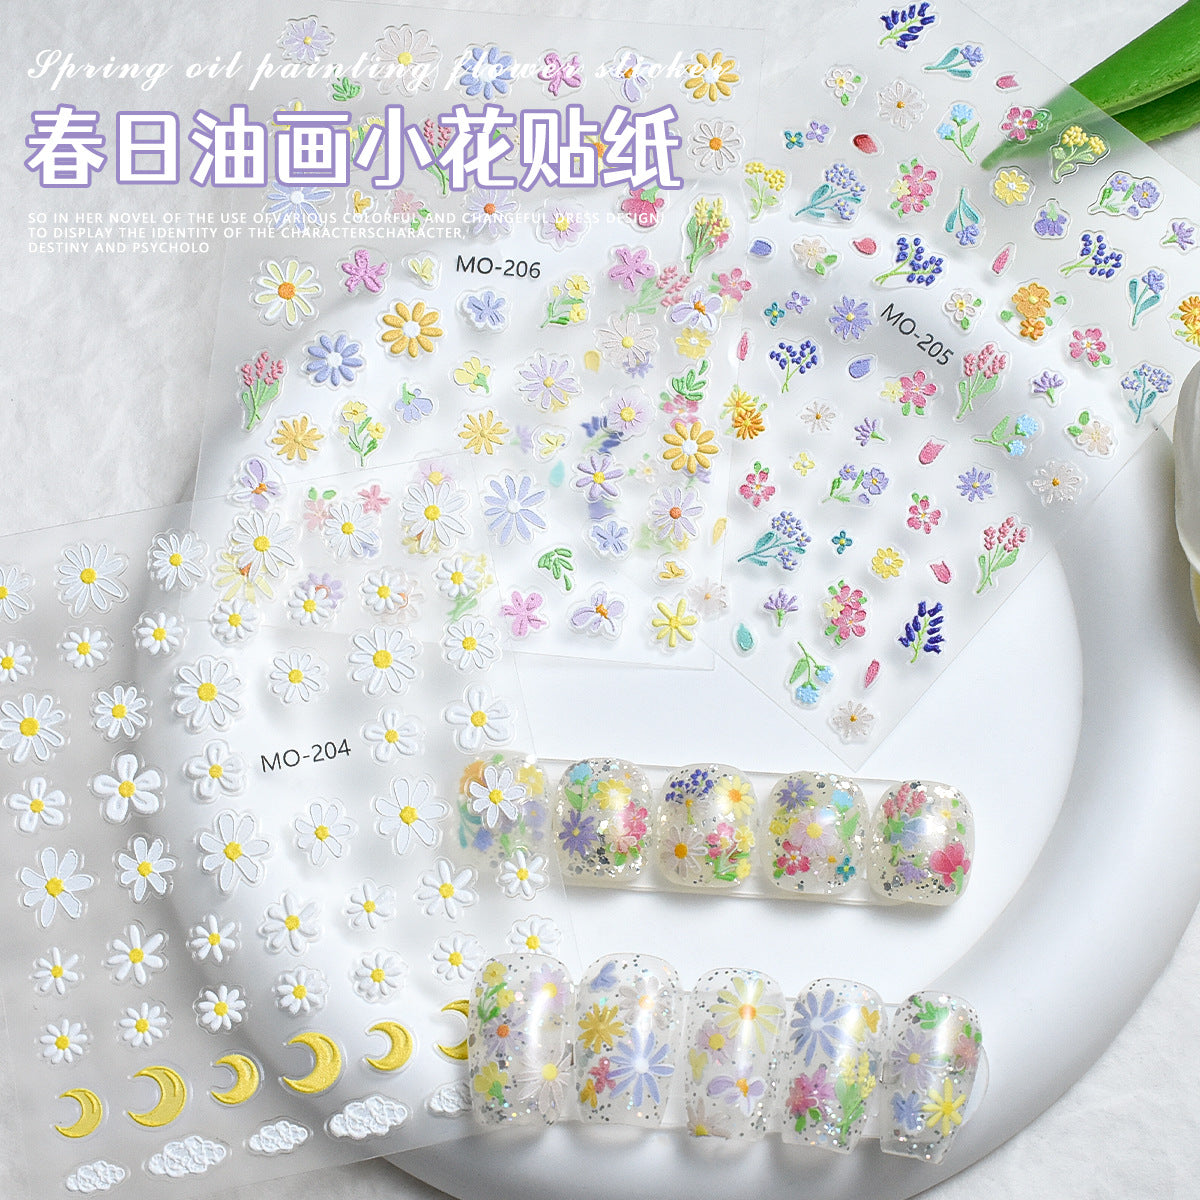 Flower Nail Art Stickers - 5D Embossed Spring Daisy Decals, Self-Adaptive